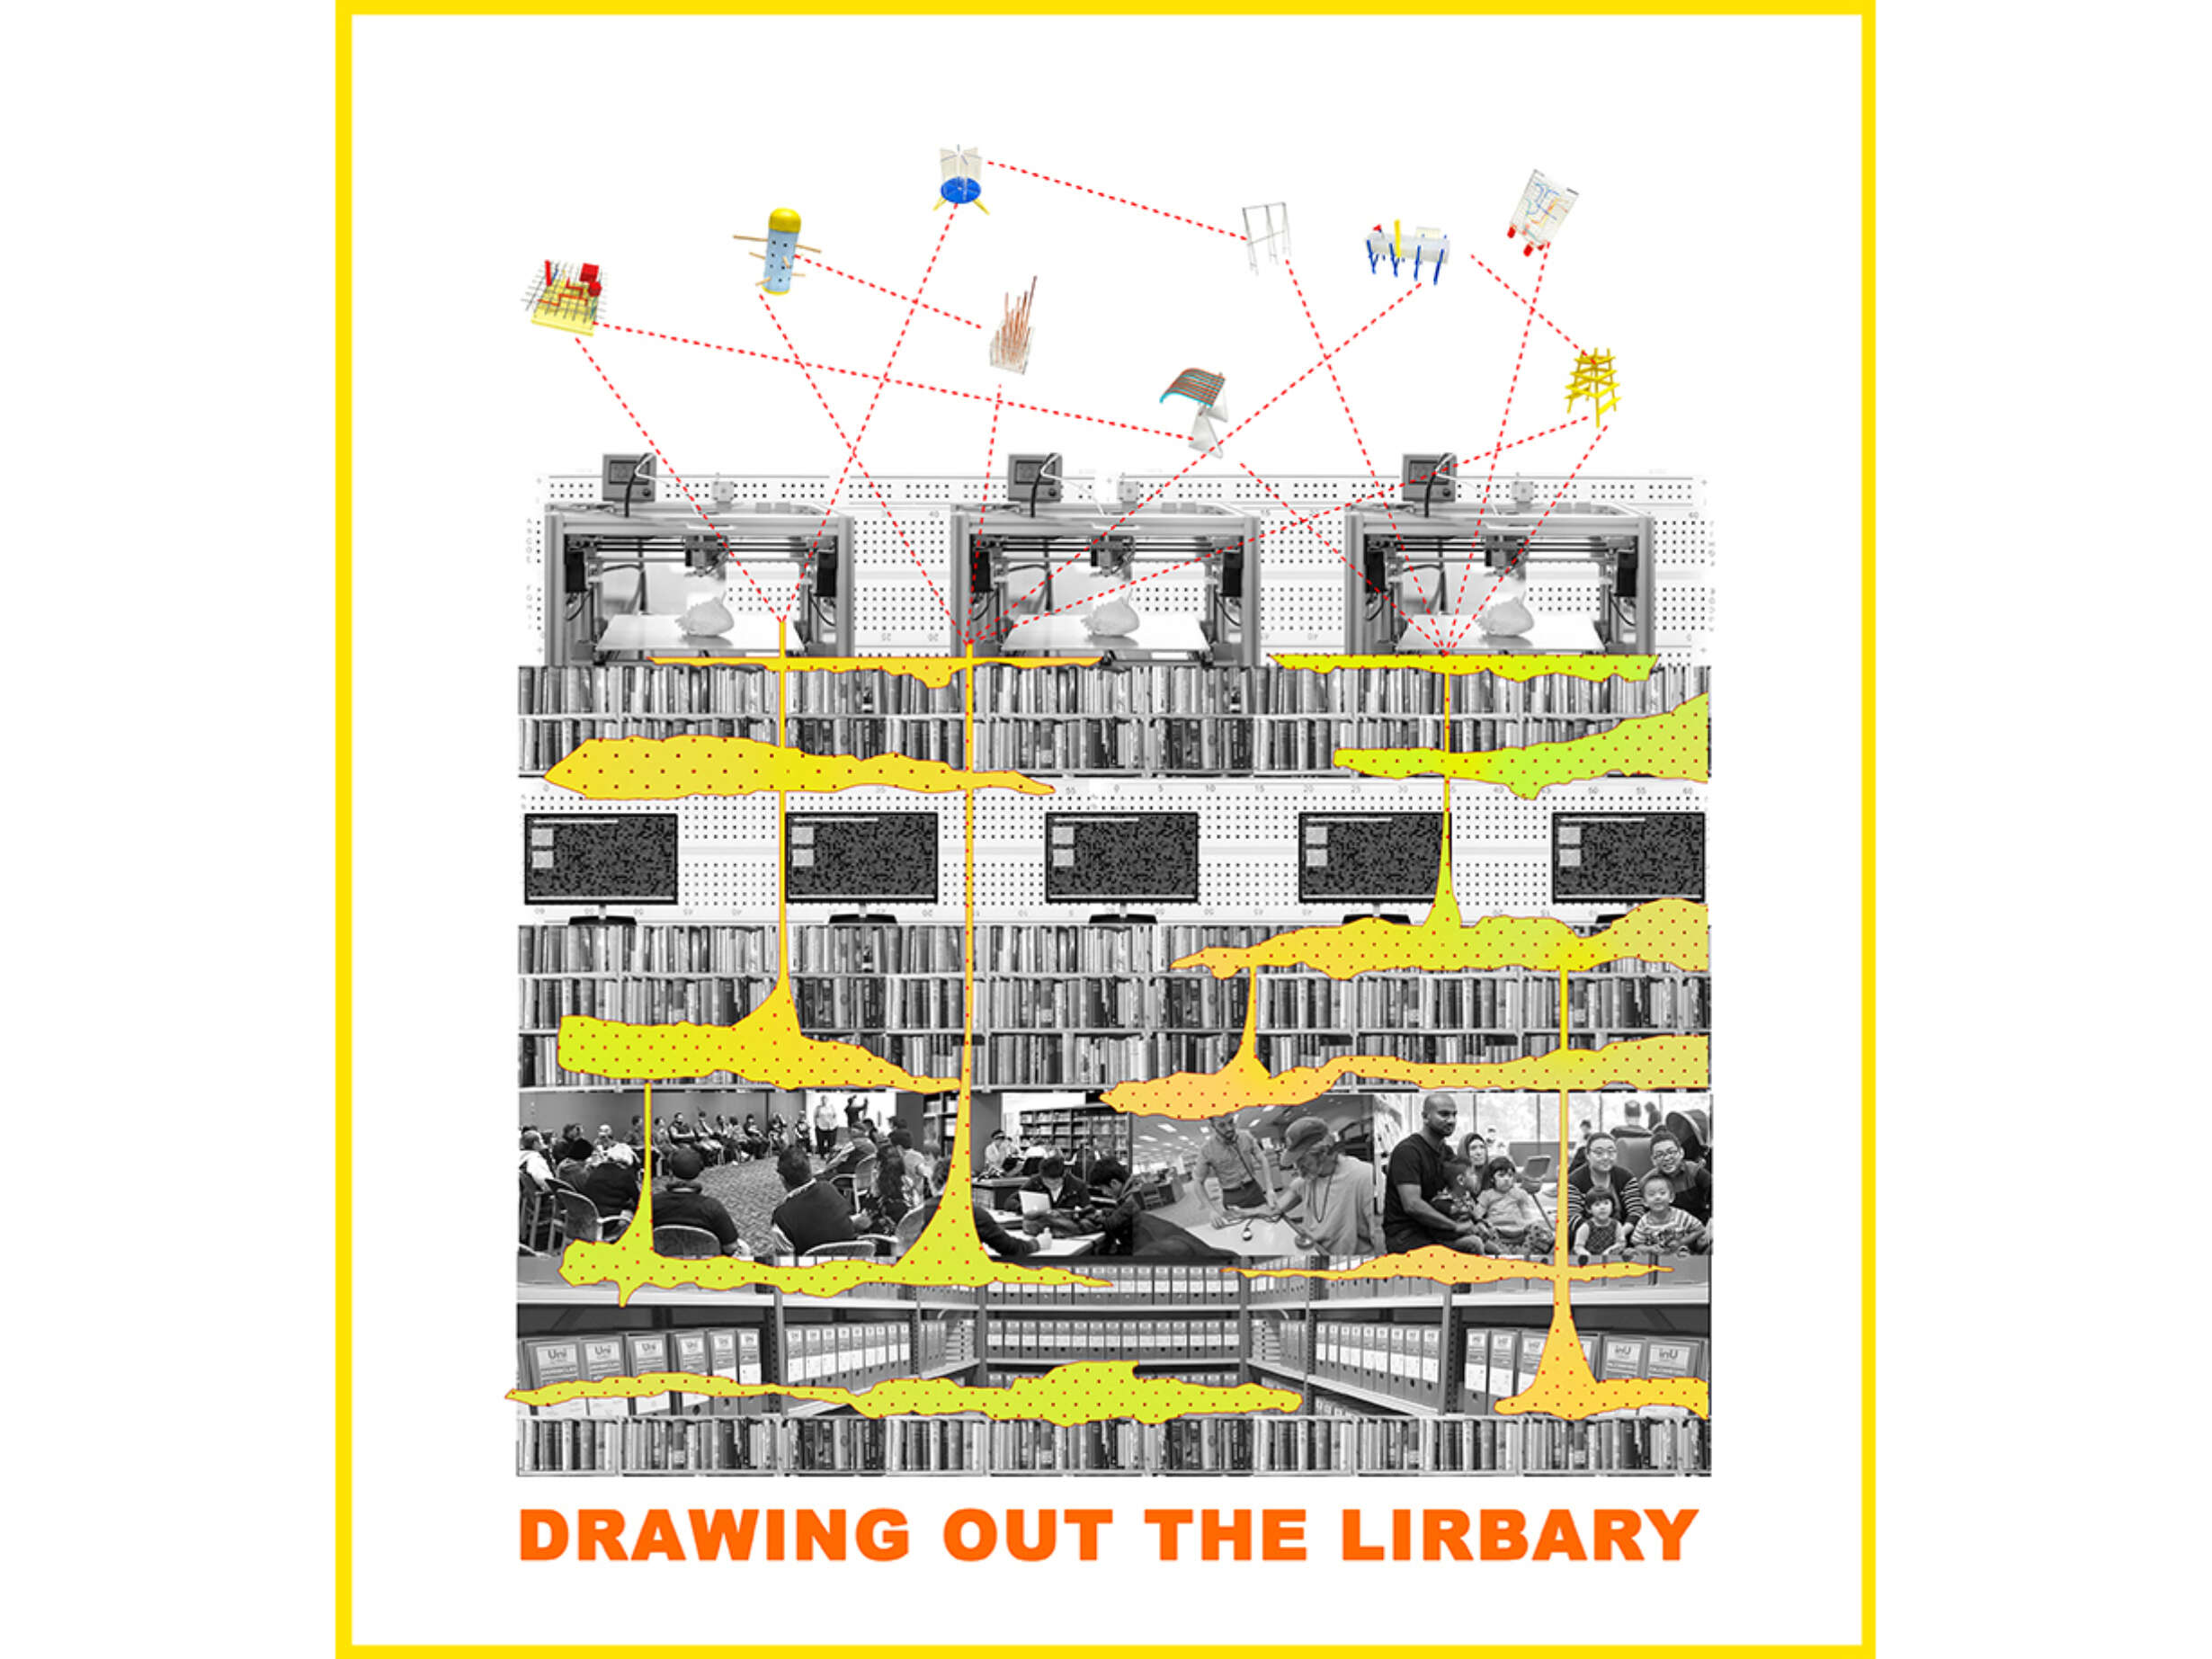 Drawing Out The Library, collage